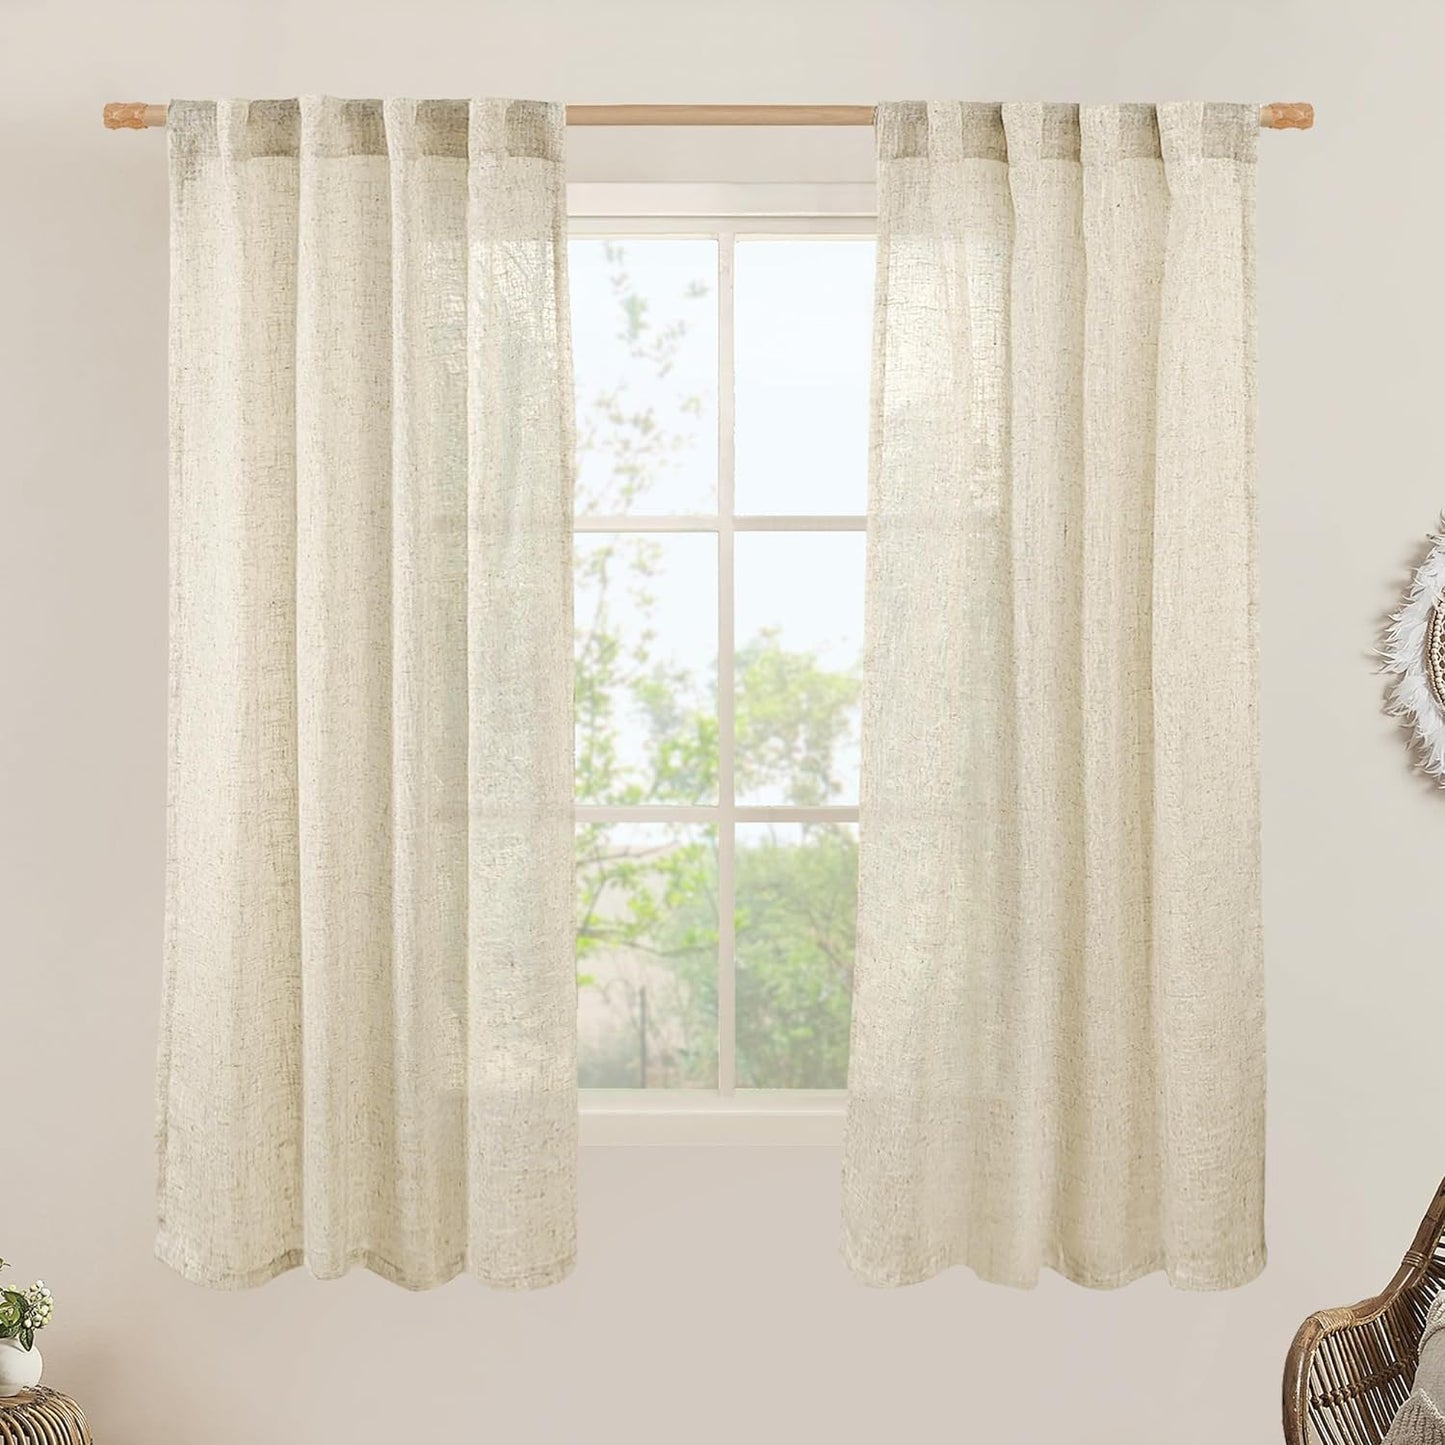 LAMIT Natural Linen Blended Curtains for Living Room, Back Tab and Rod Pocket Semi Sheer Curtains Light Filtering Country Rustic Drapes for Bedroom/Farmhouse, 2 Panels,52 X 108 Inch, Linen  LAMIT Beige 38W X 63L 